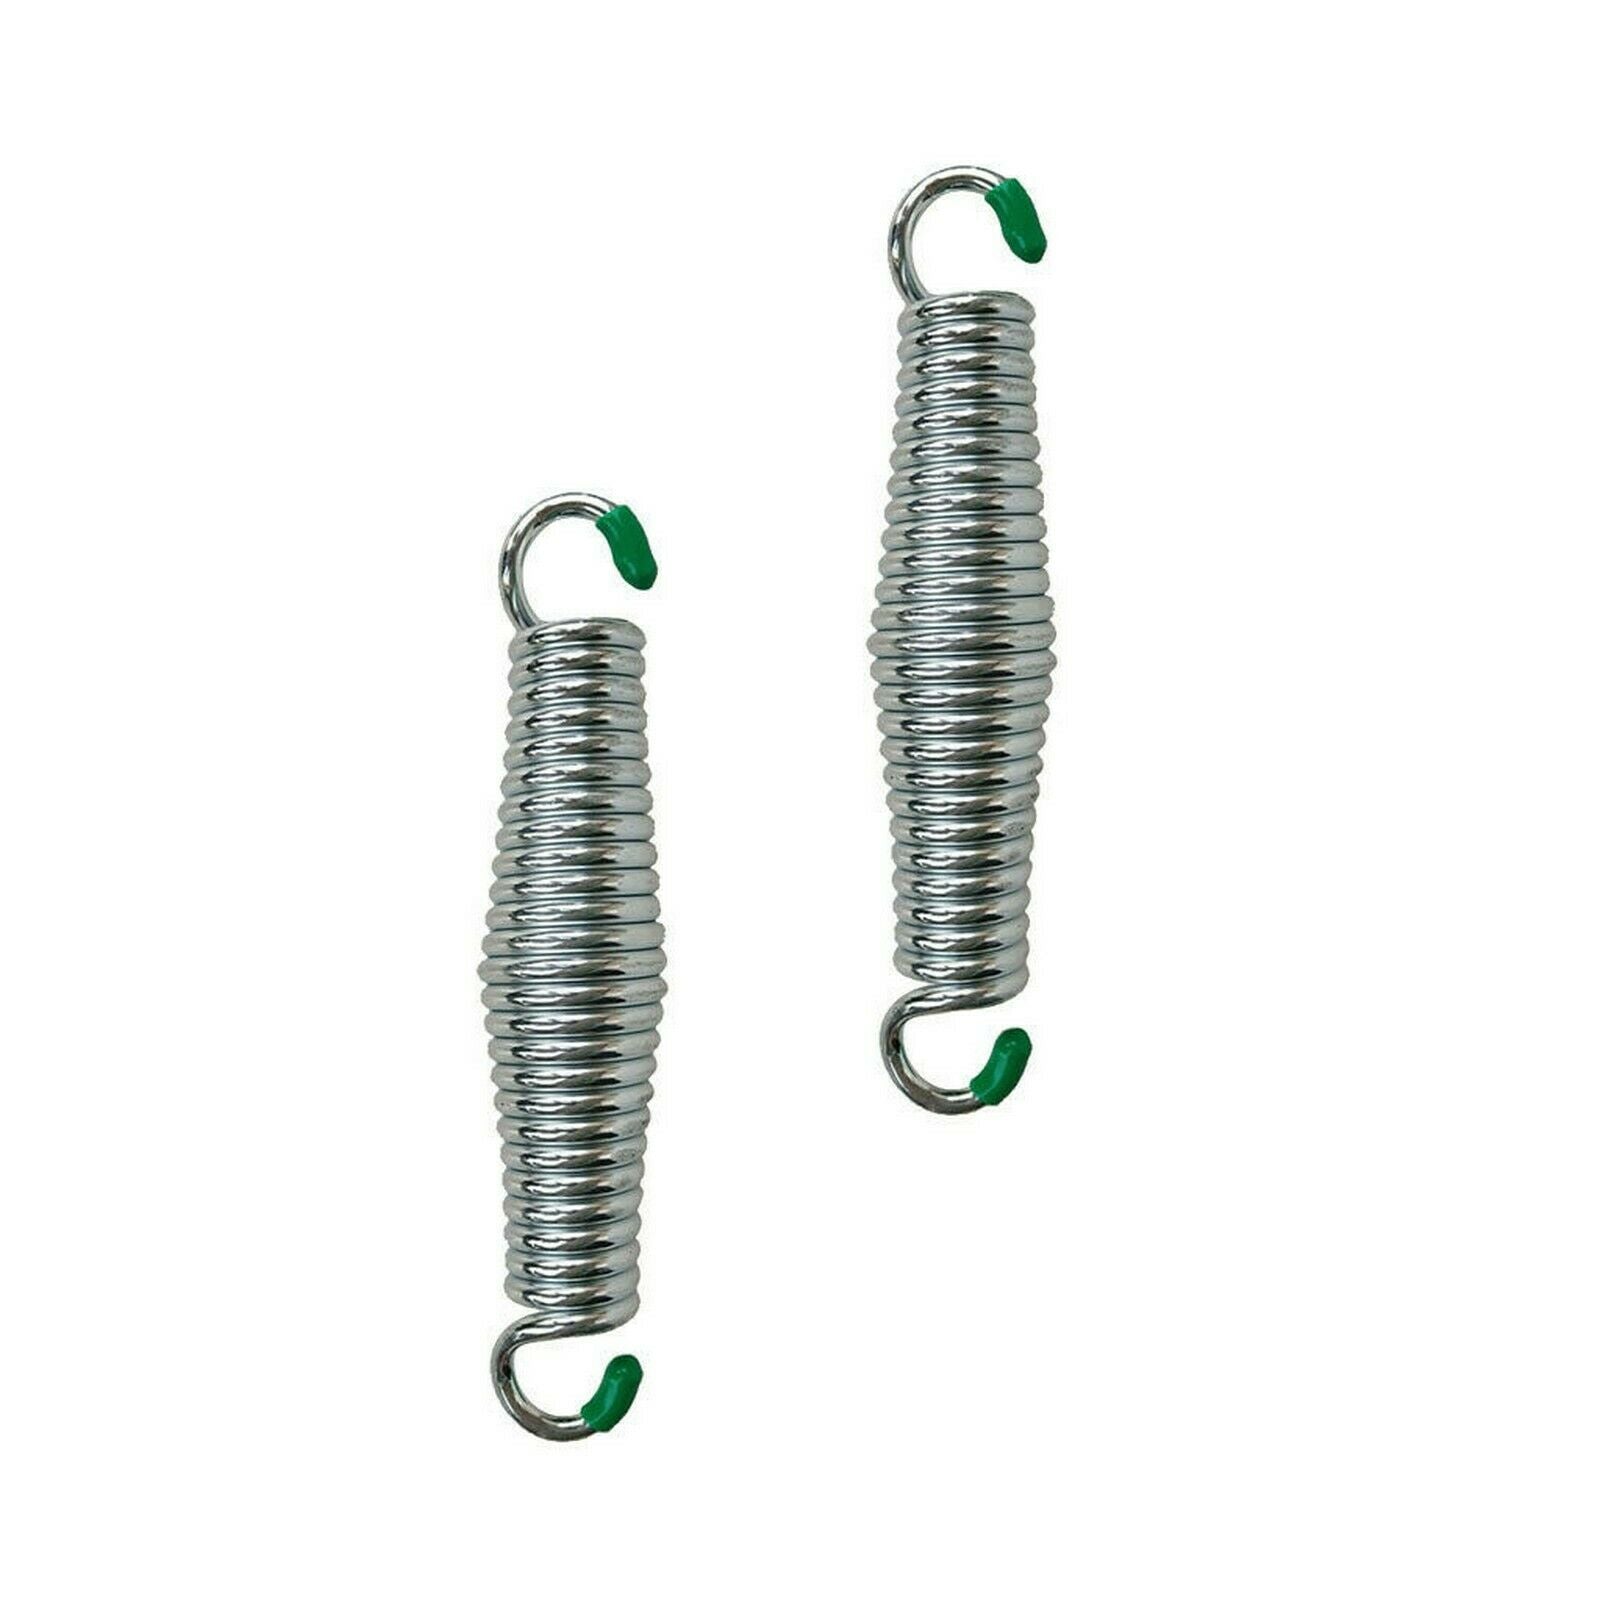 2 Pack Heavy Duty Coil Shaped Hammock Chair Springs for Porch Swings and Hanging